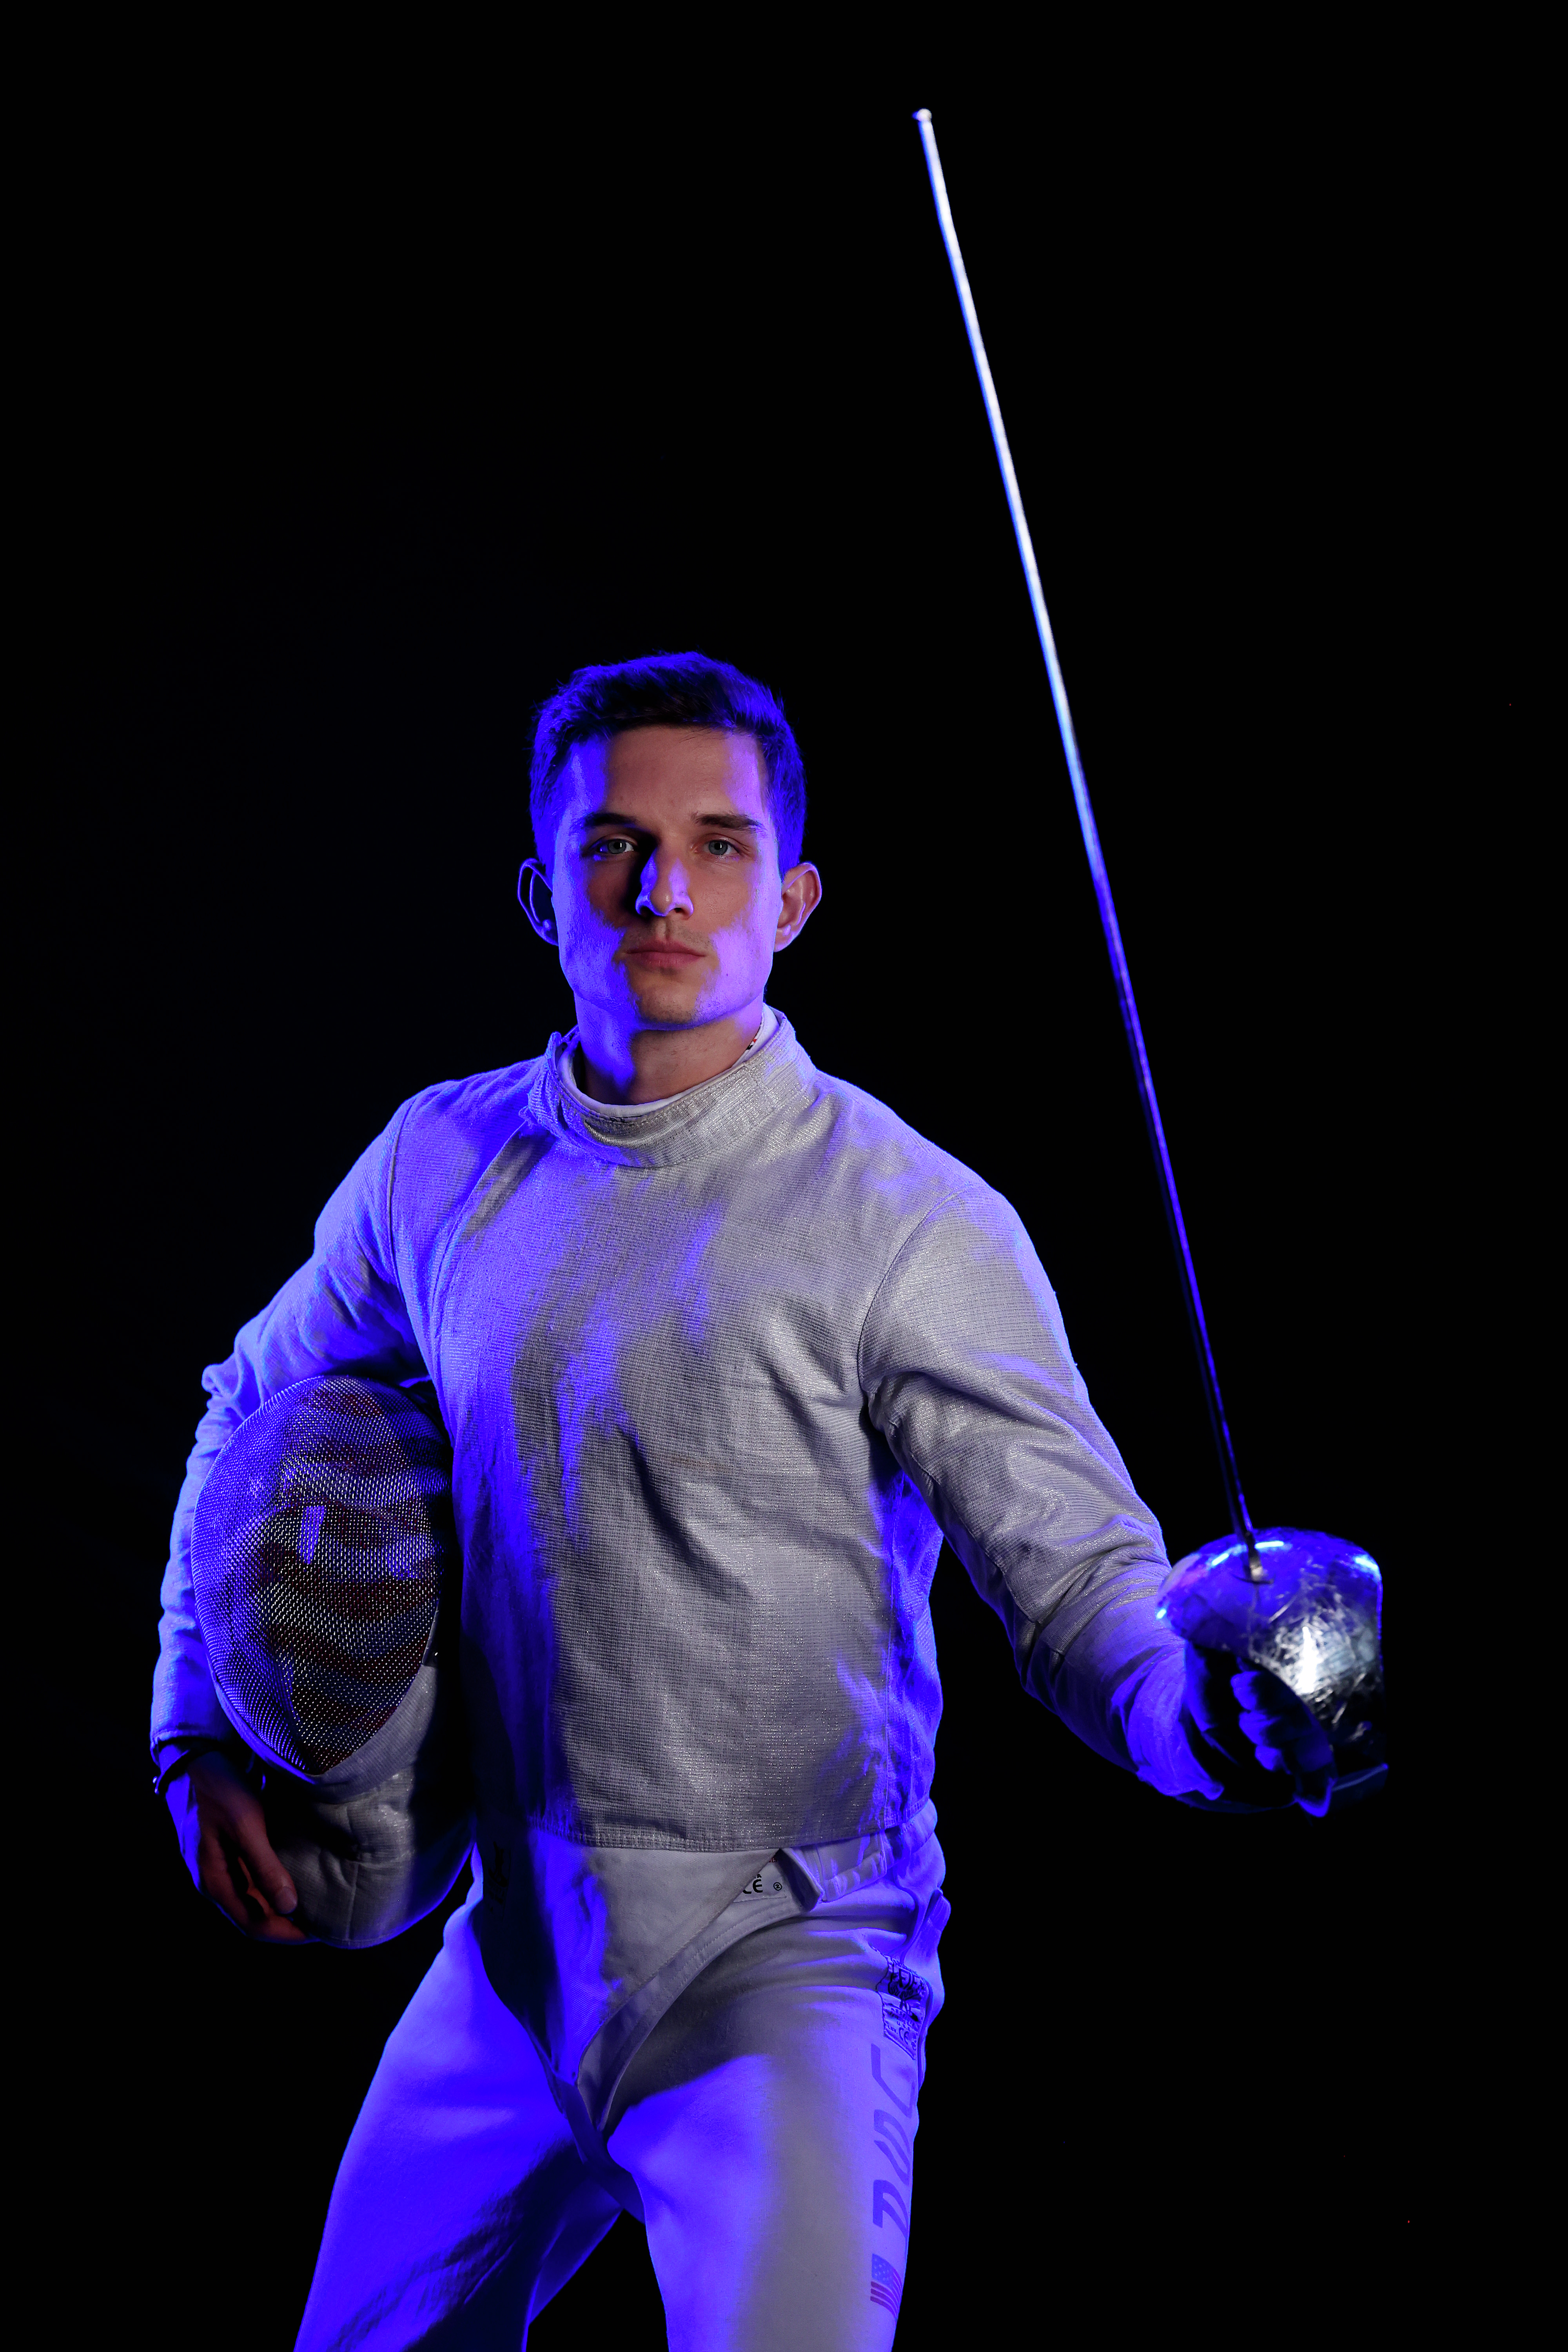 Road to Gold: Park Ridge Native heads to Paris as part of US fencing team